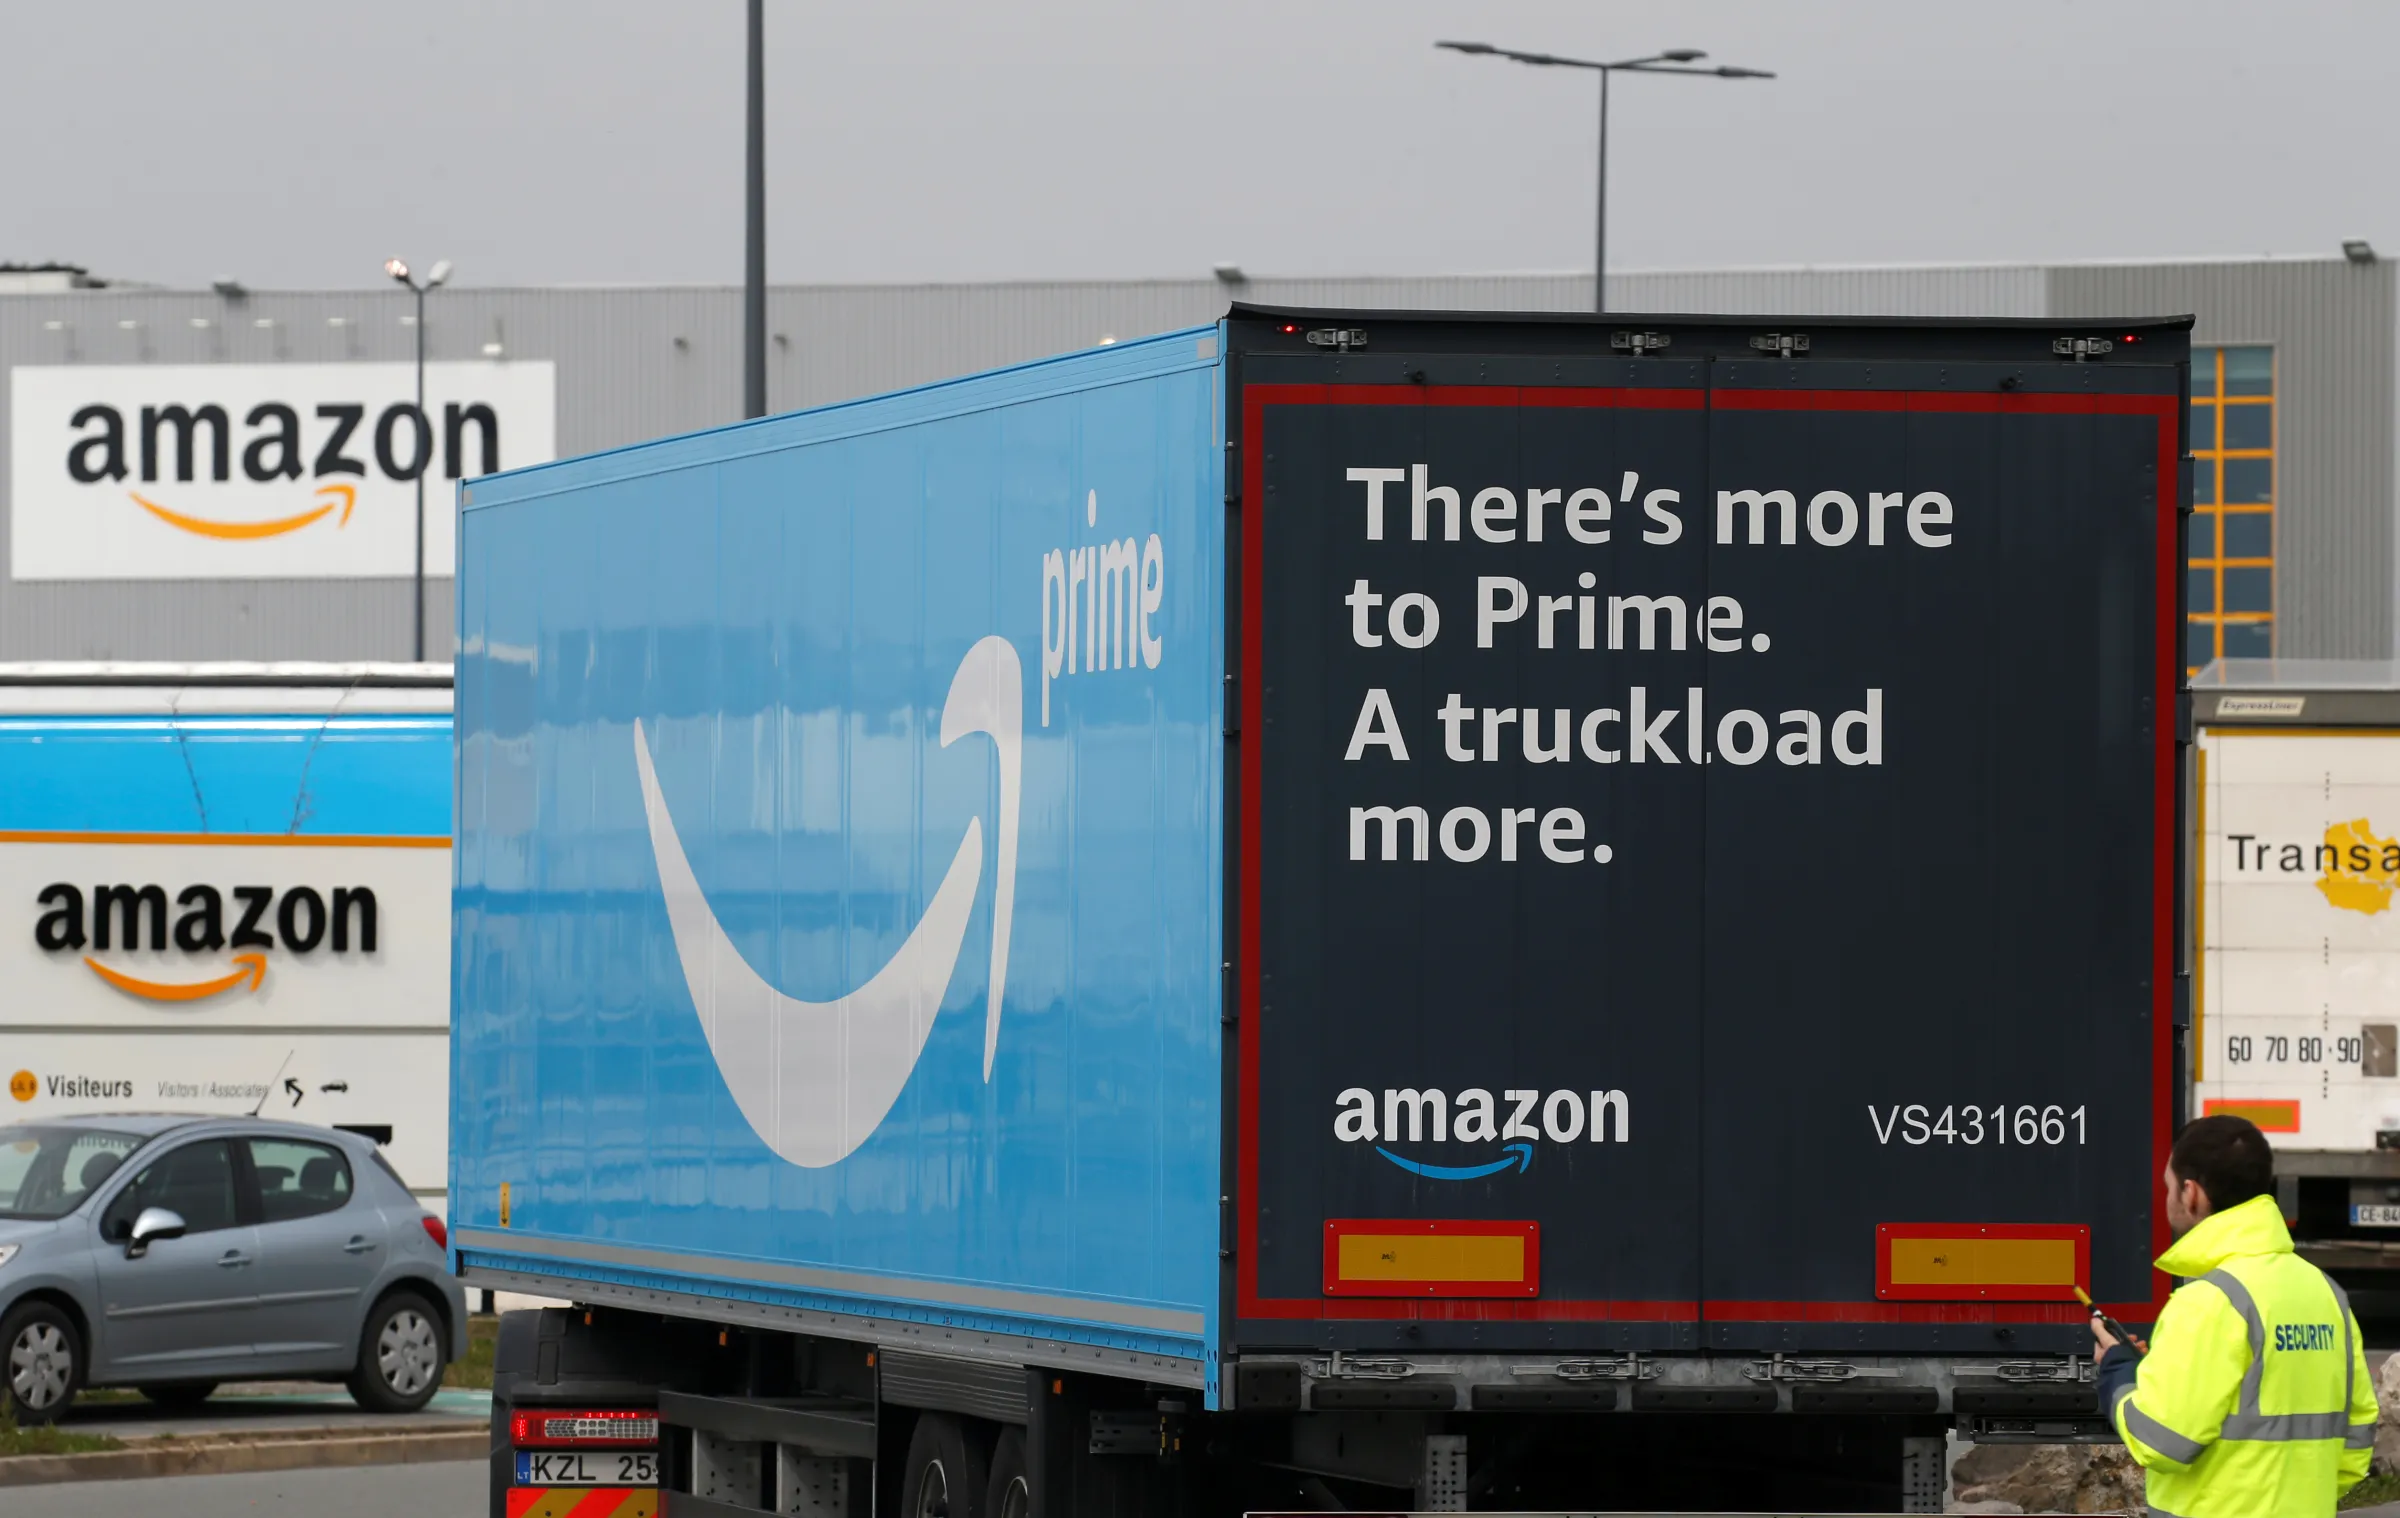 A truck with the logo of Amazon Prime Delivery arrives at the Amazon logistics center in Lauwin-Planque, northern France, March 19, 2020. REUTERS/Pascal Rossignol